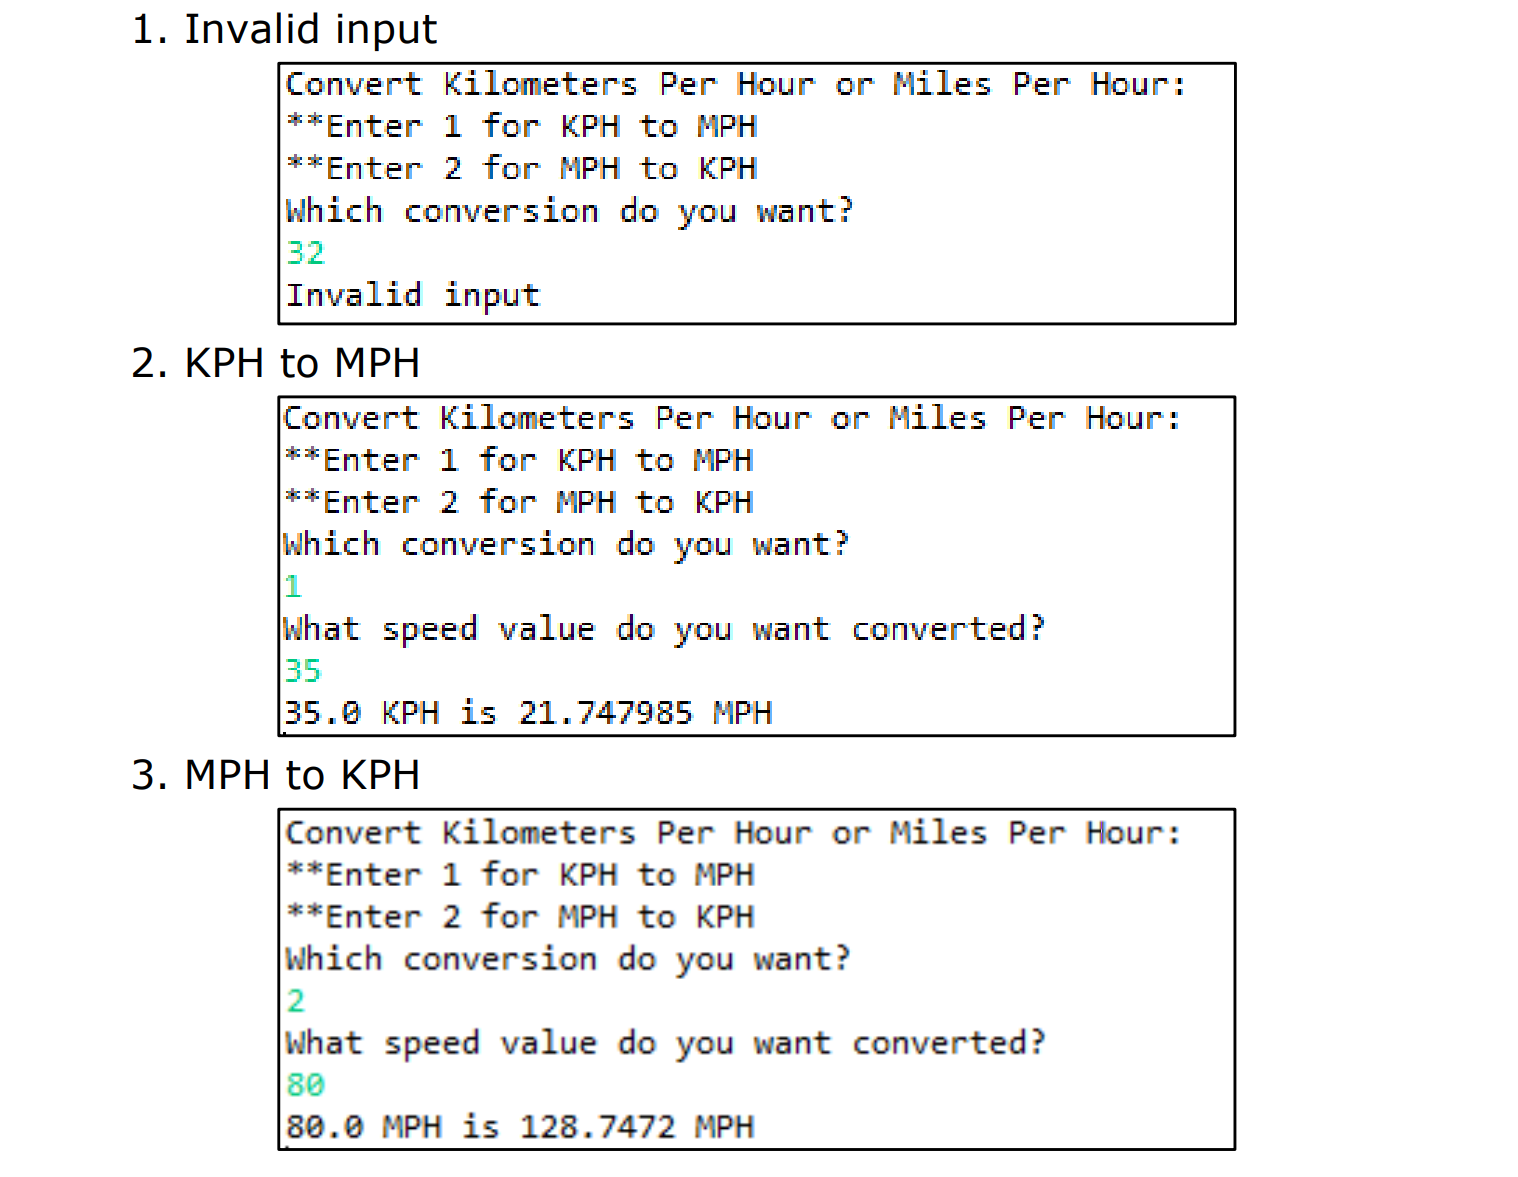 1. Invalid input
Convert kilometers Per Hour or Miles Per Hour
**Enter 1 for KPH to MPH
**Enter 2 for MPH to KPH
hich convers ntr
sion do you wa
Invalid input
2. KPH to MPHH
Convert Kilometers Per Hour or MilesPer Hour
**Enter 1 for KPH to MPH
**Enter 2 for MPH to KPH
Which conversion do you want?
peed value do you wan
35
35.0 KPH is 21.747985MPH
3. MPH to KPHH
Convert Kilometers Per Hour or Miles Per Hour:
**Enter 1 for KPH to MPH
*Enter 2 for MPH to KPH
Which conversion do you want?
2
What speed value do you want converted?
80
80.0 MPH is 128.7472 MPH
